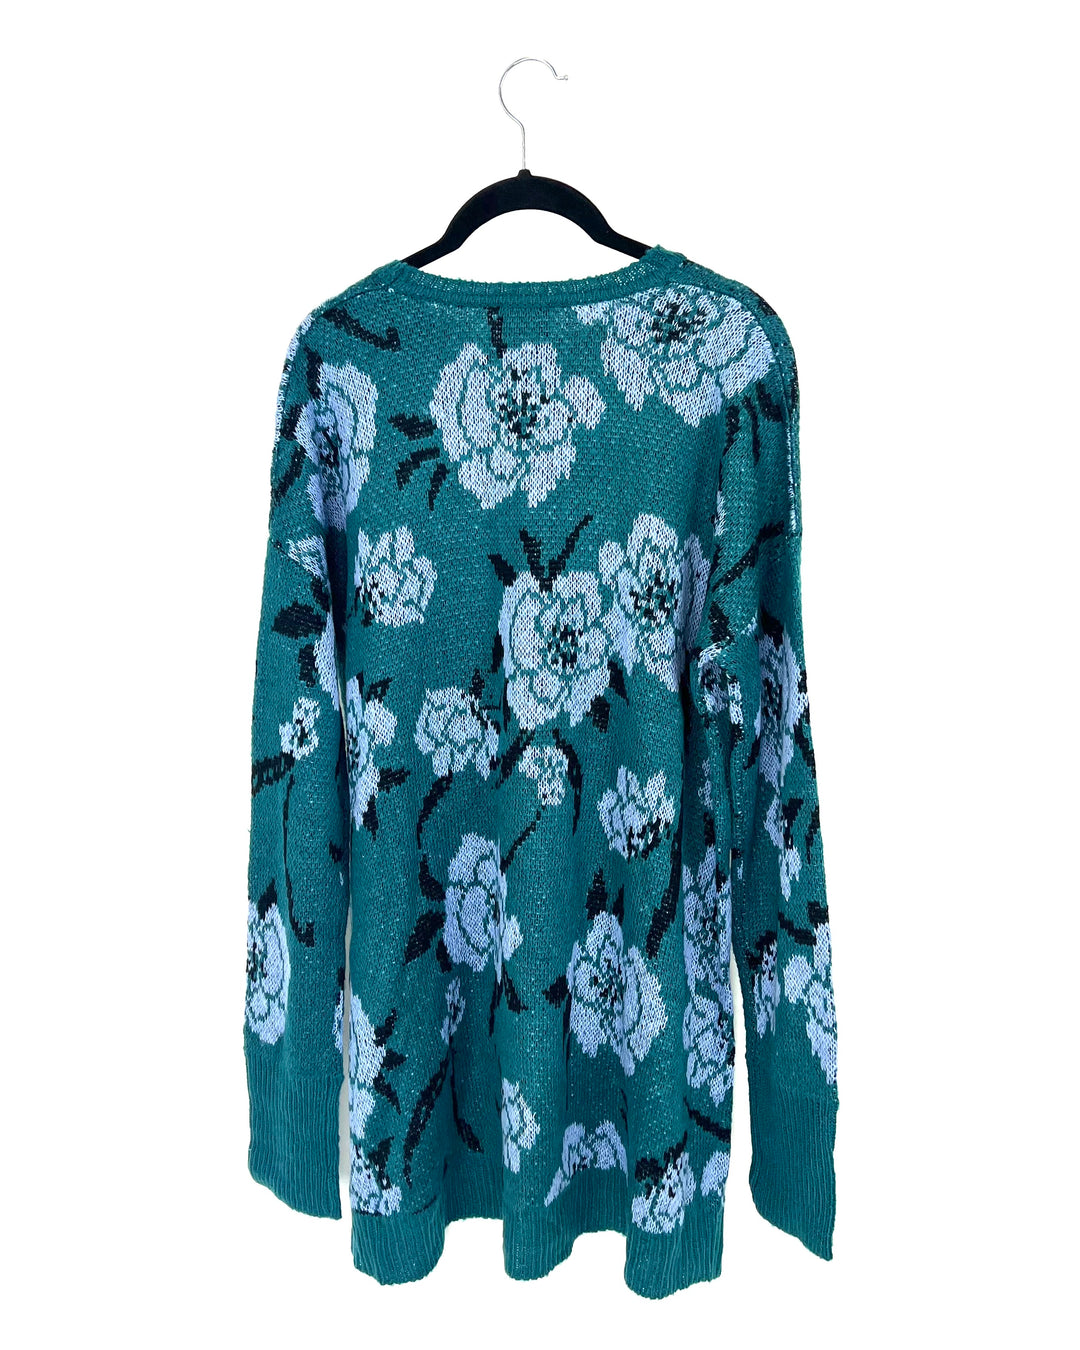 Teal Floral Print Sweater - Small